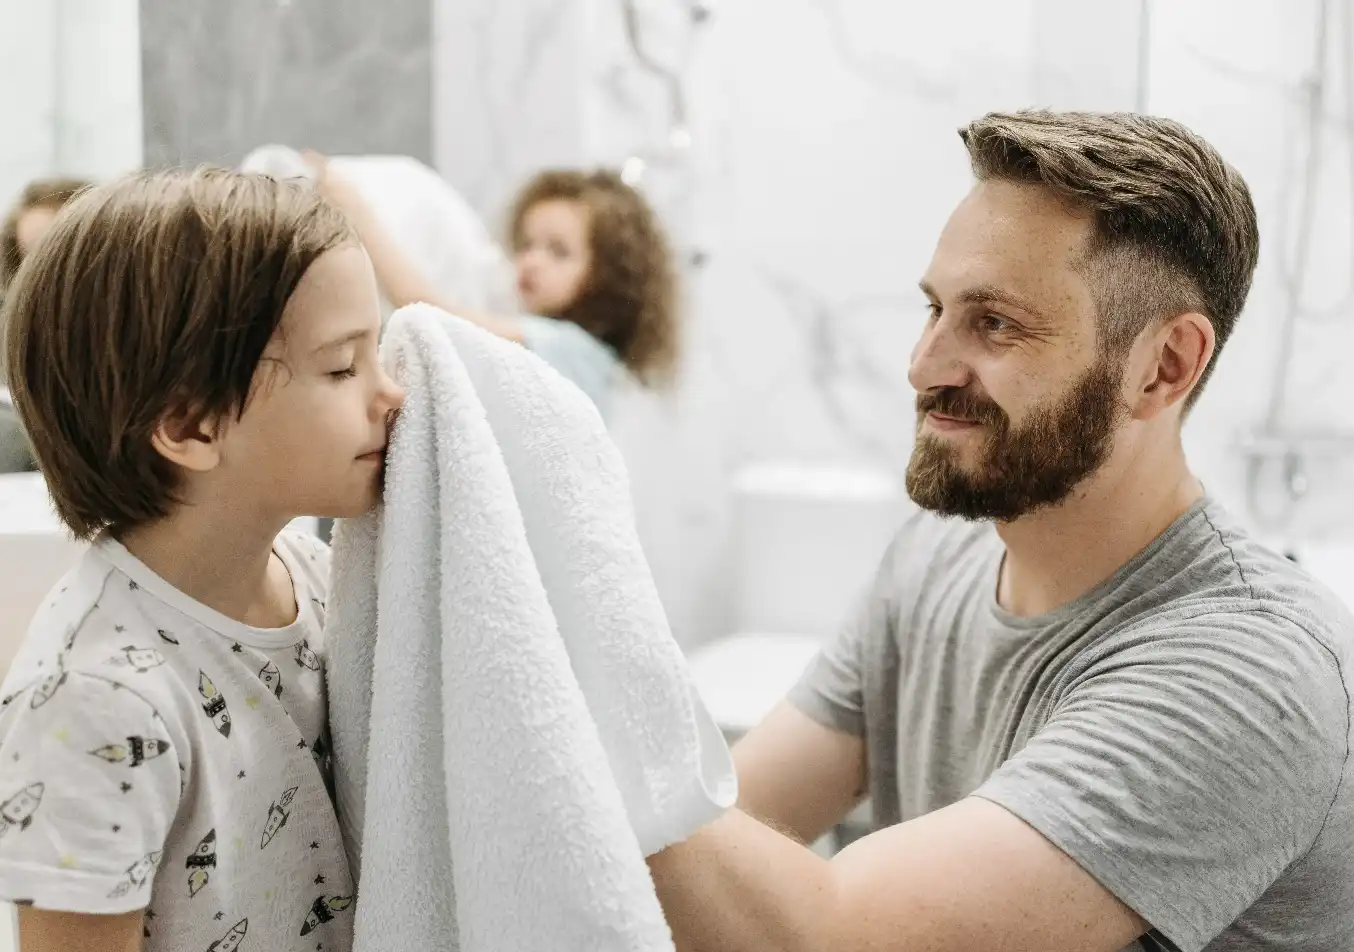 parent wiping child's face with a towel